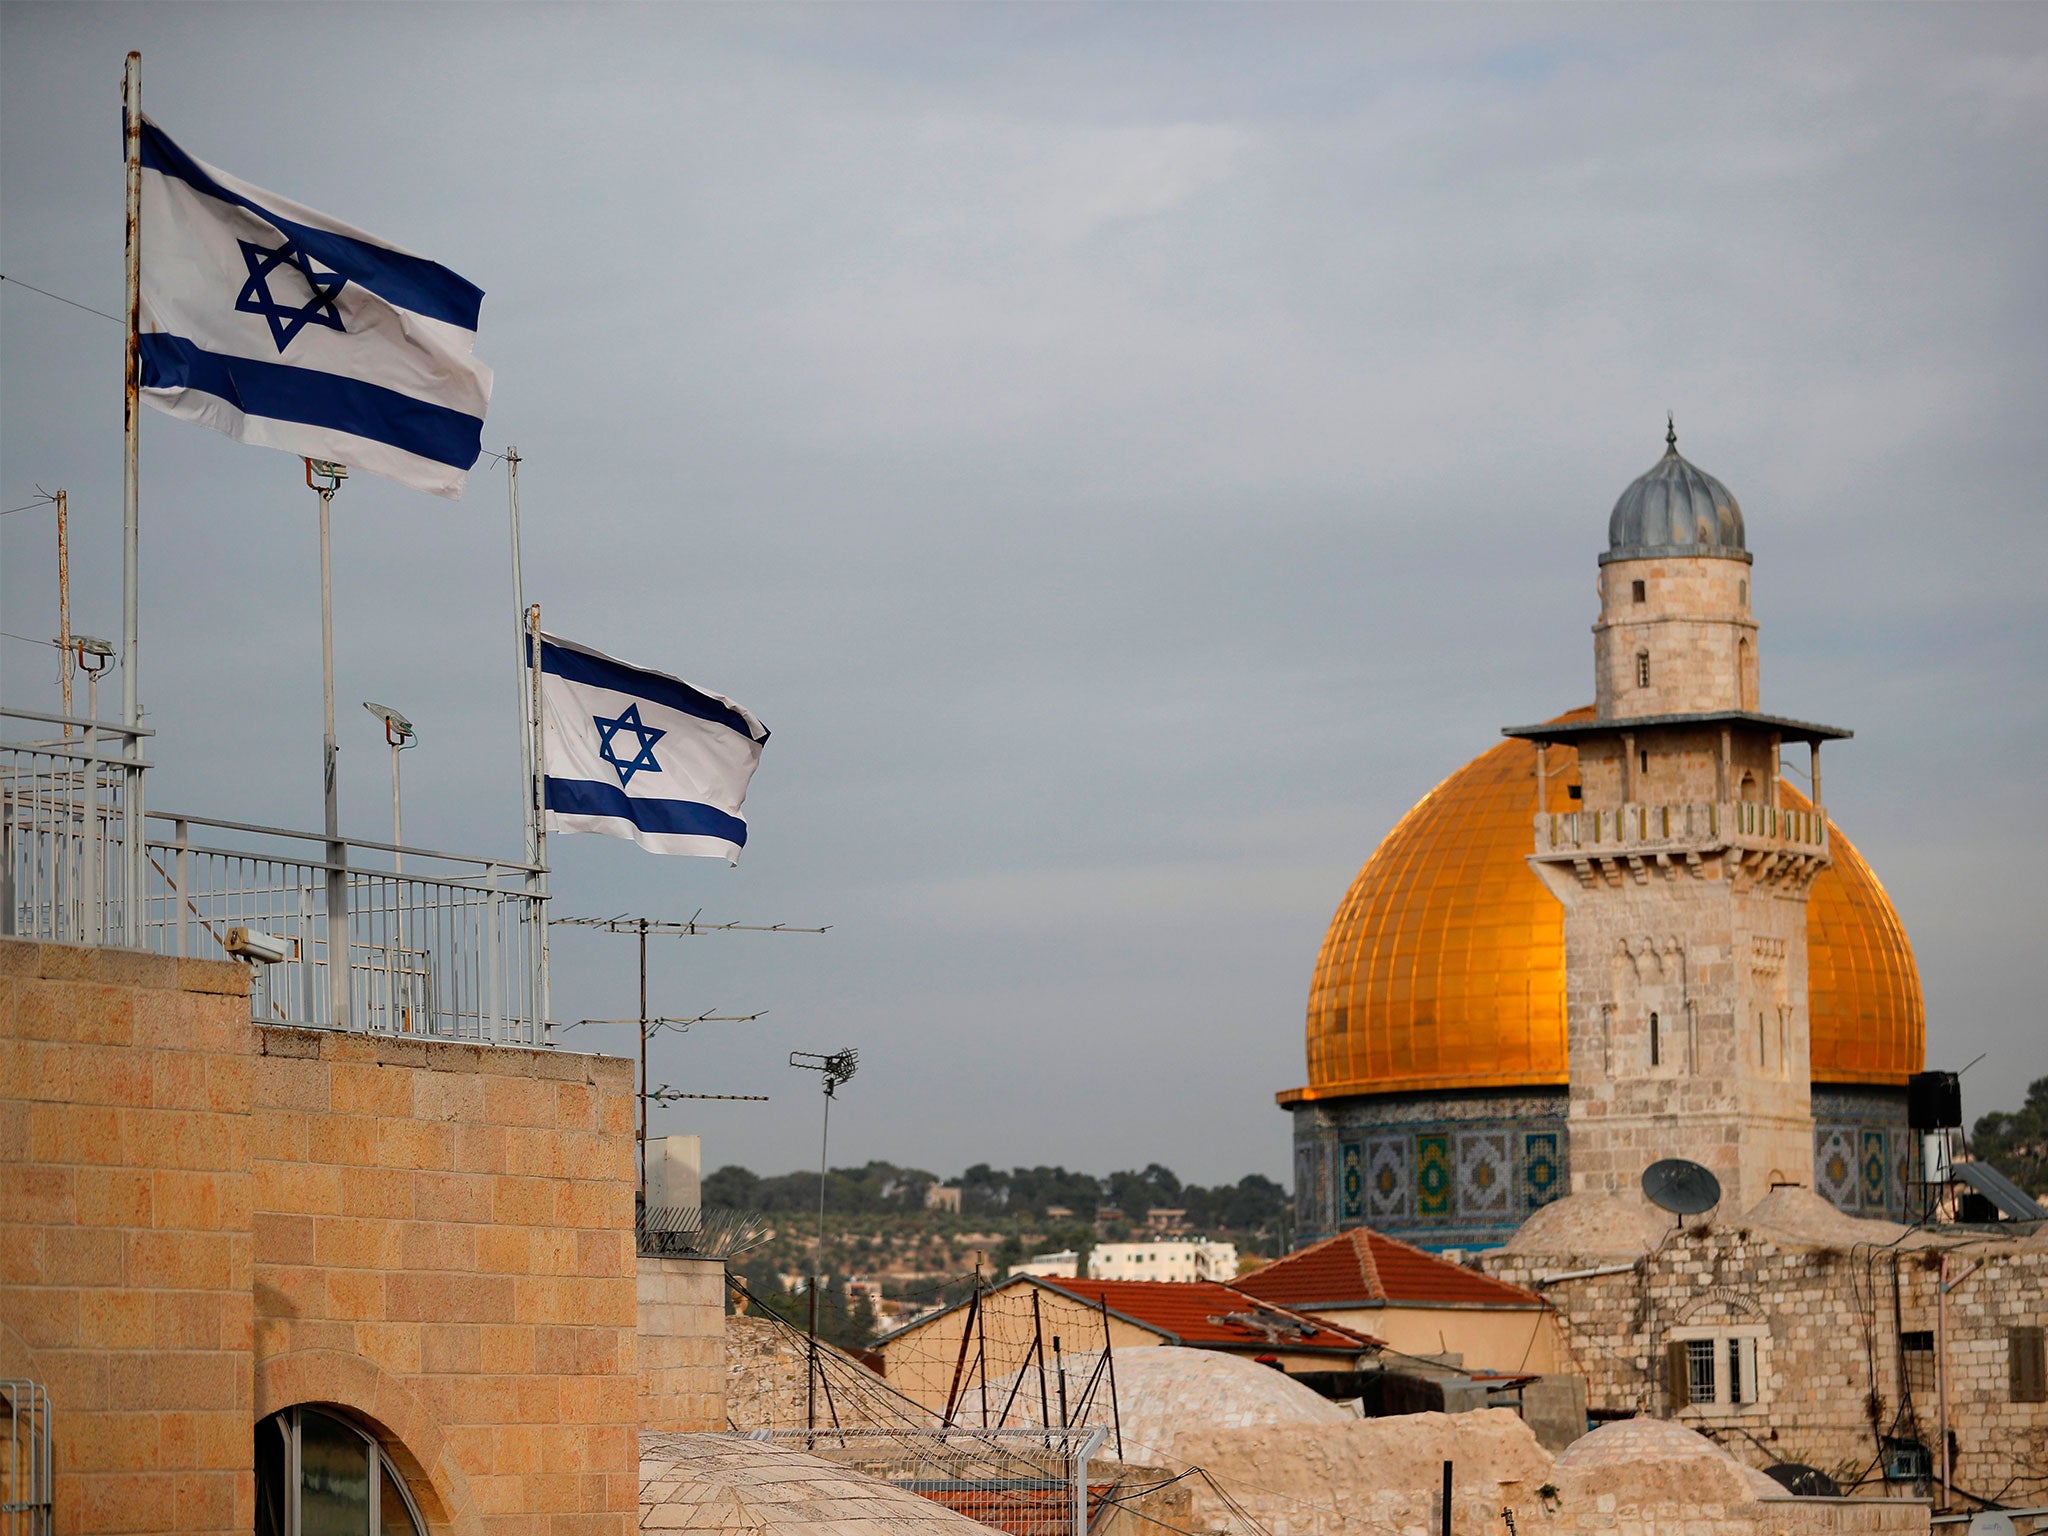 Israeli flags fly near the Dome of the Rock in the Al-Aqsa mosque compound, a holy site for both Jews and Muslims